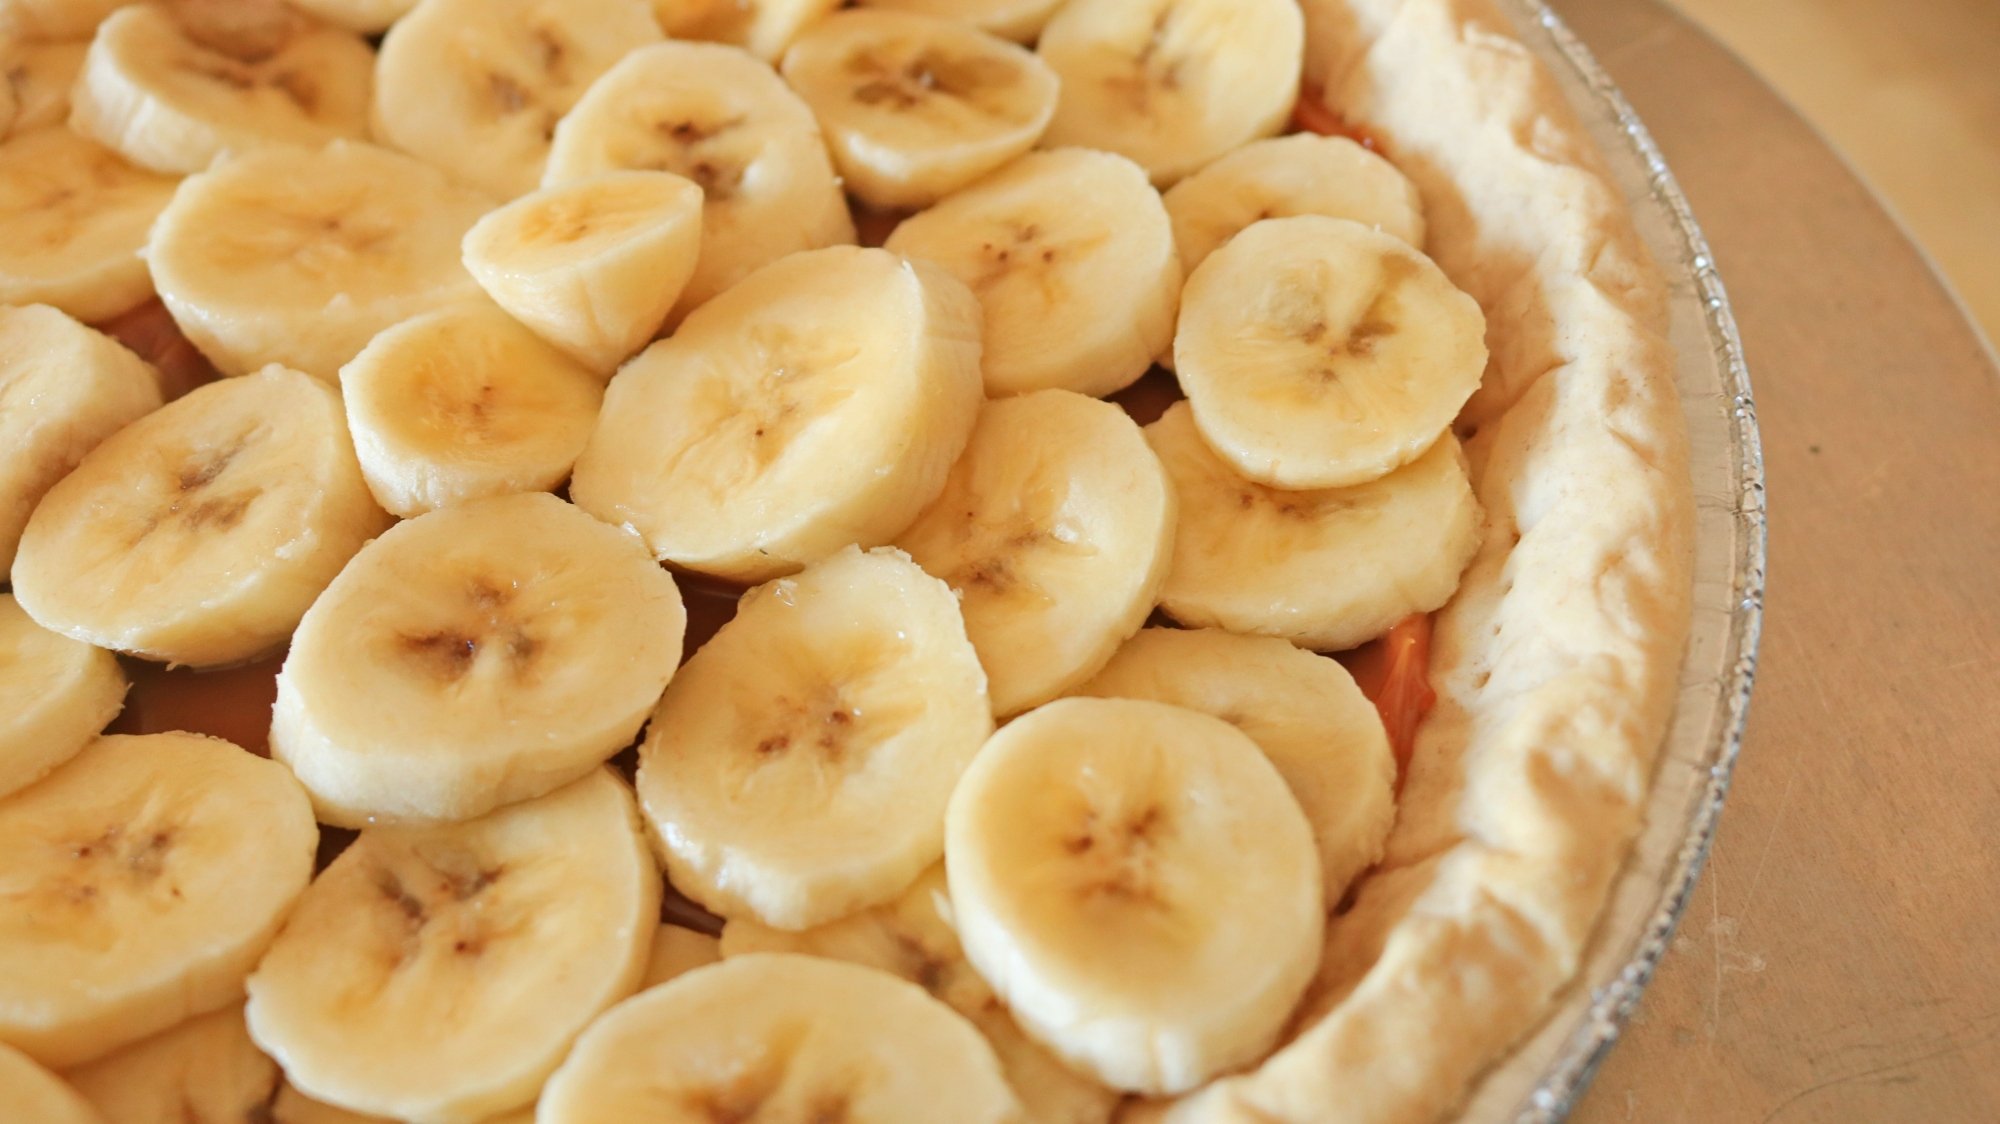 Bananas in a pie crust.